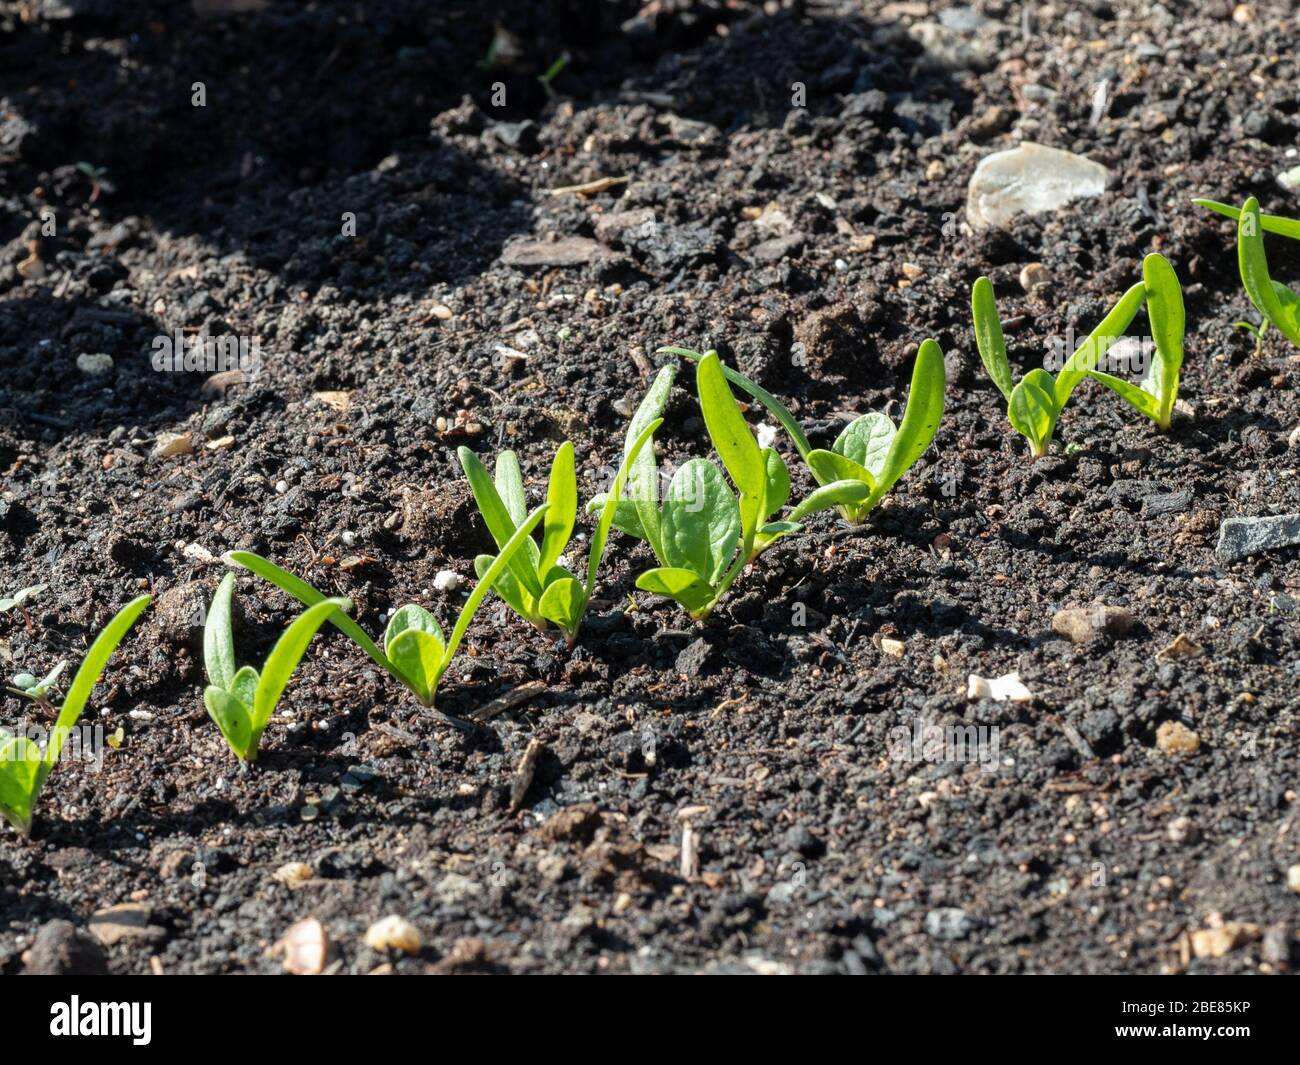 A close up of a row of young spinach seedlings Stock Photo